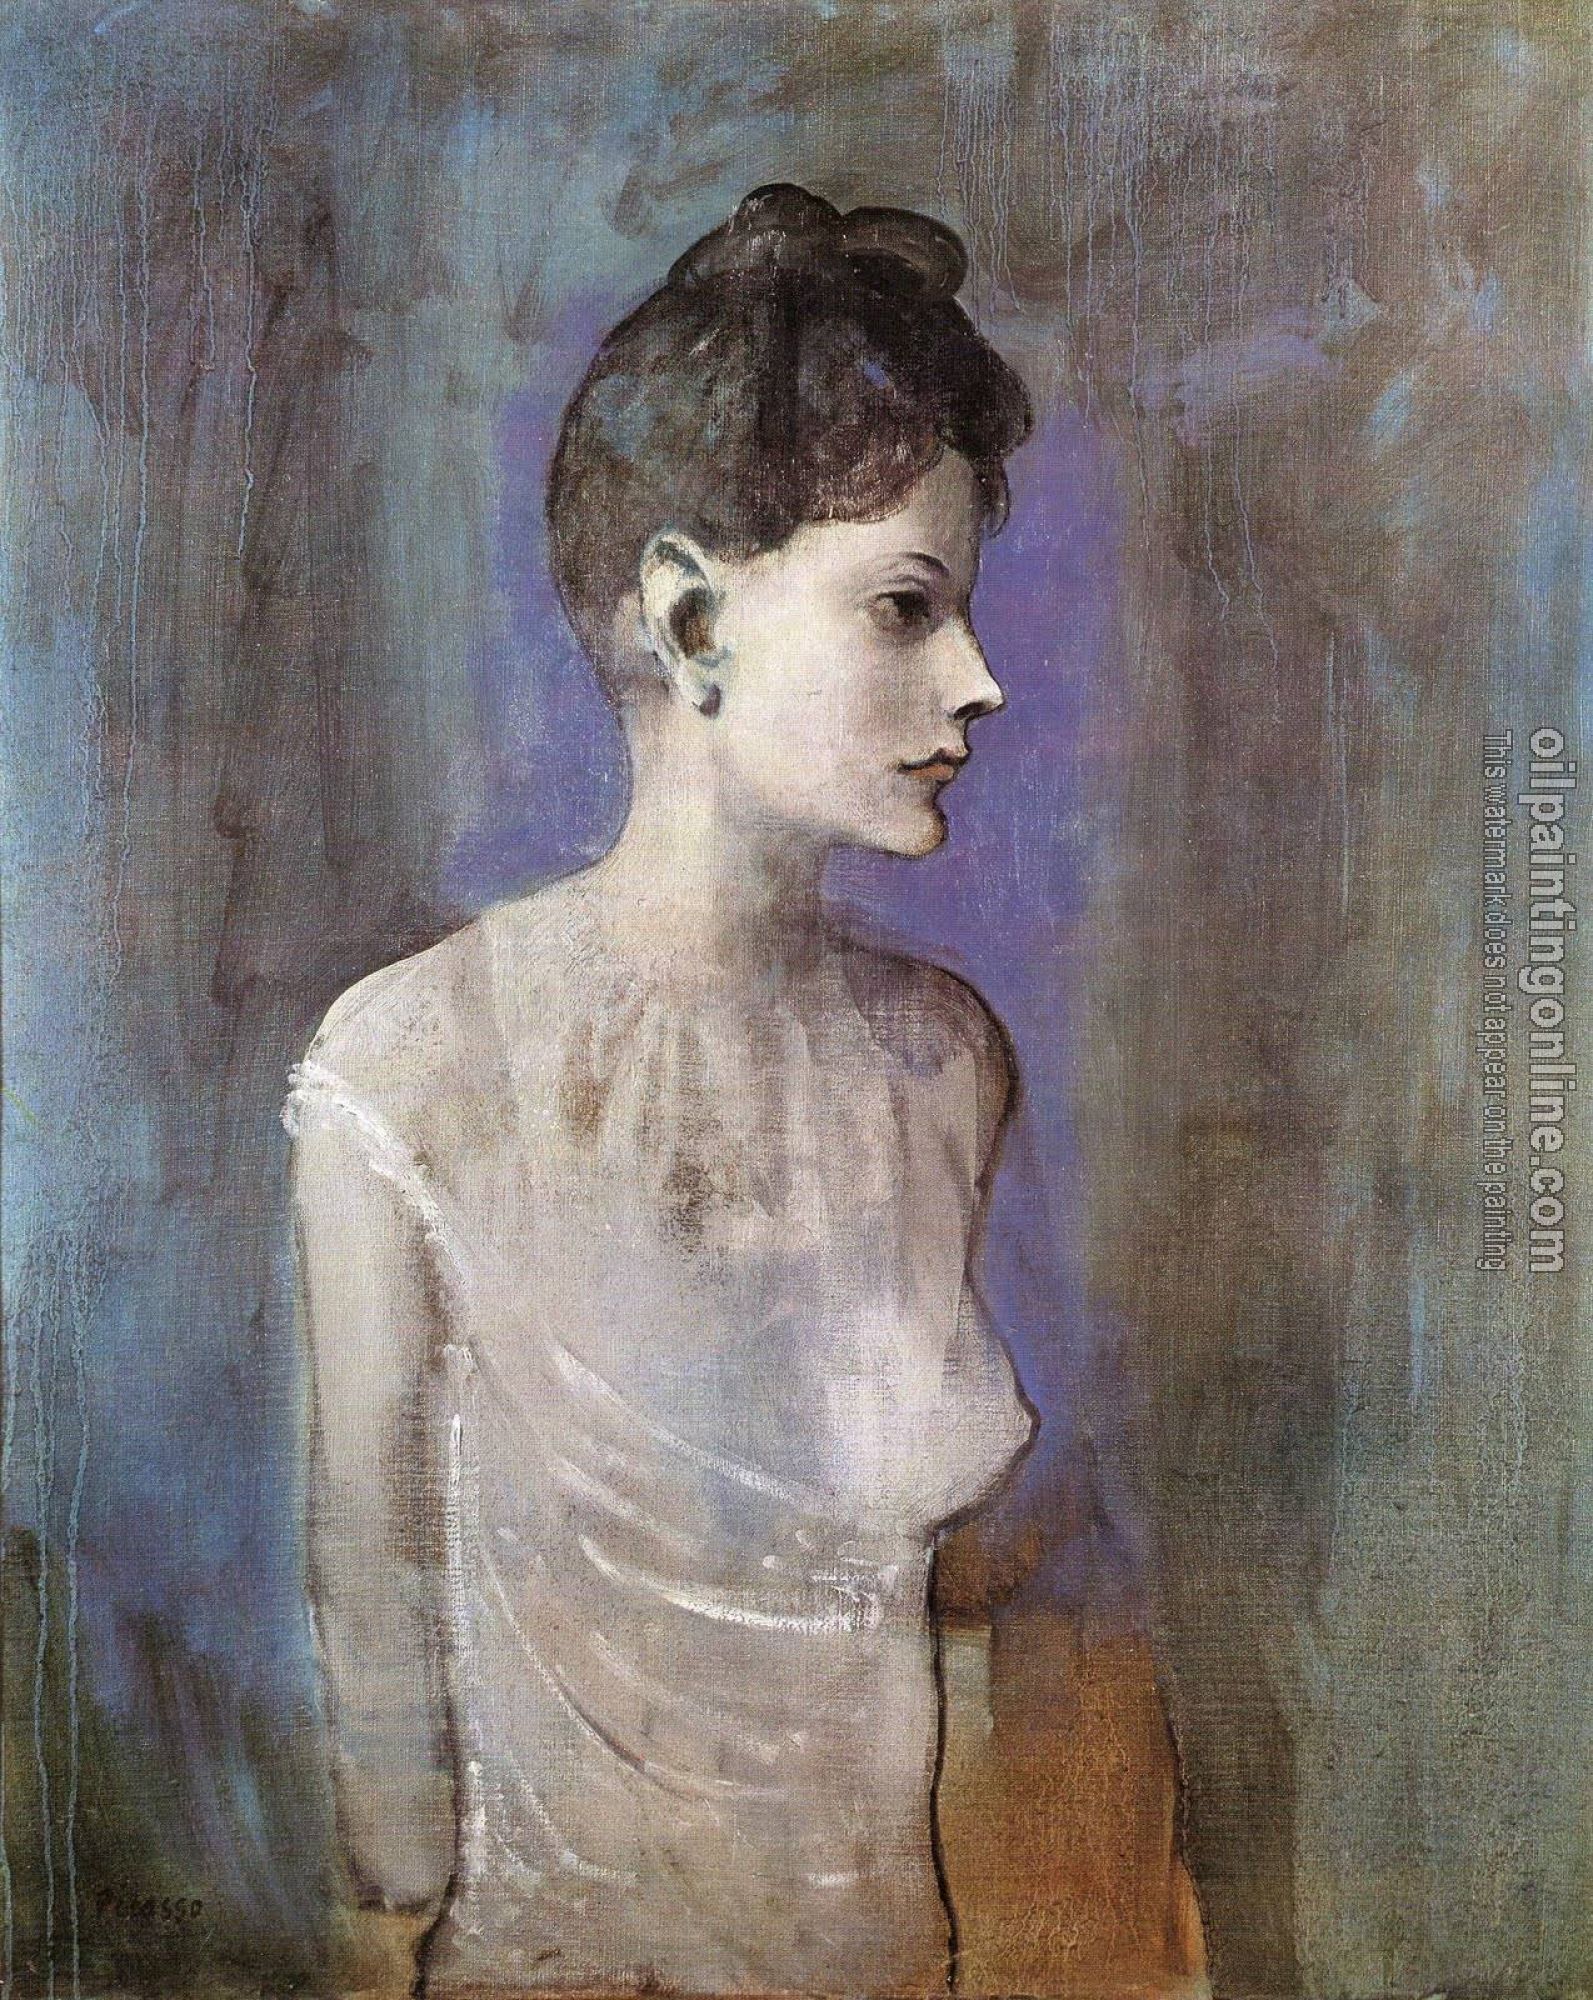 Picasso, Pablo - woman in a chemise